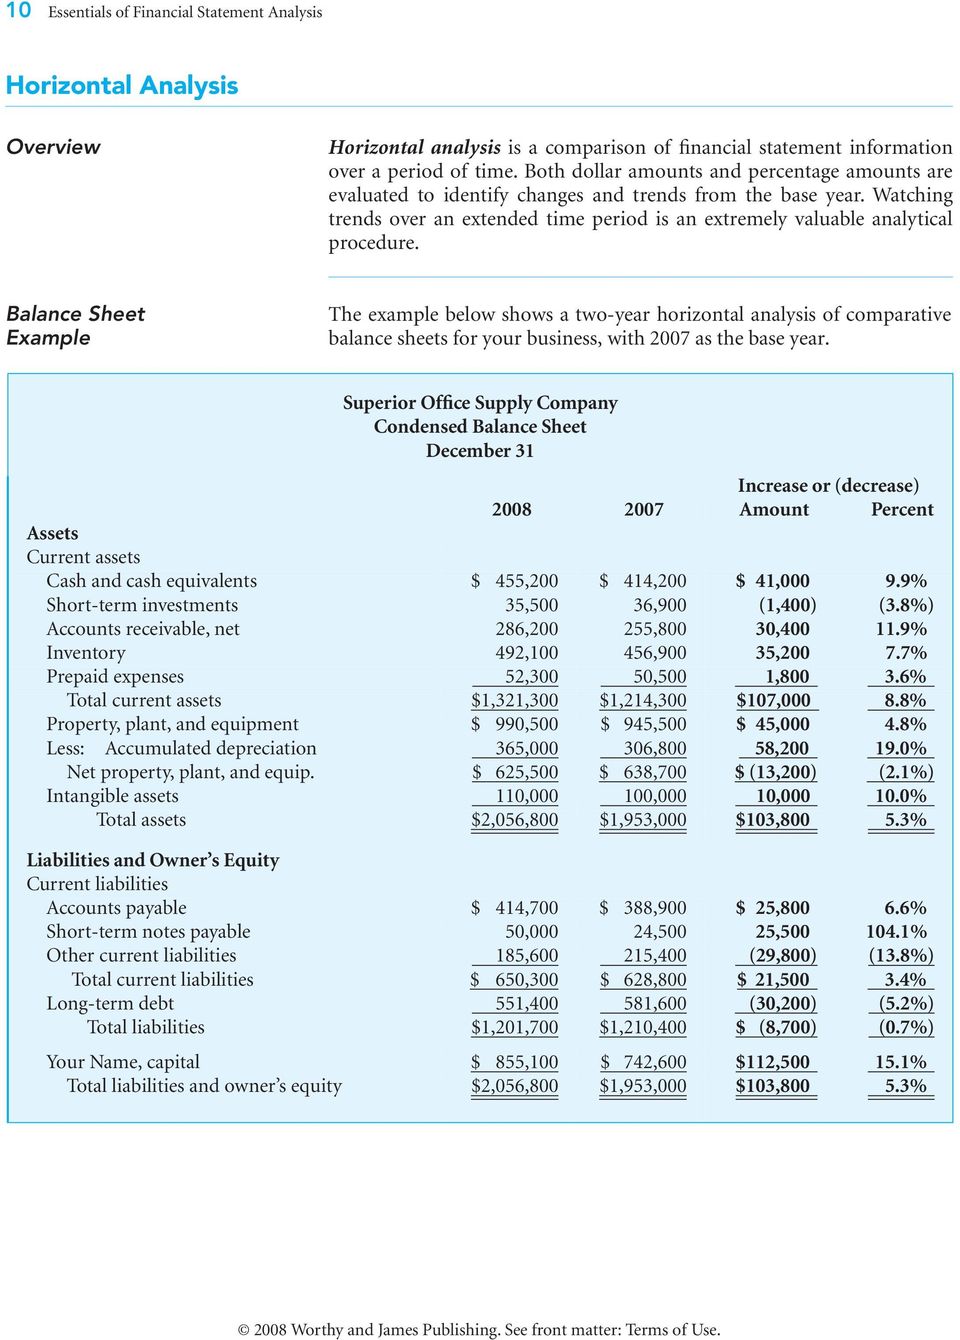 Balance Sheet Example The example below shows a two-year horizontal analysis of comparative balance sheets for your business, with 2007 as the base year.